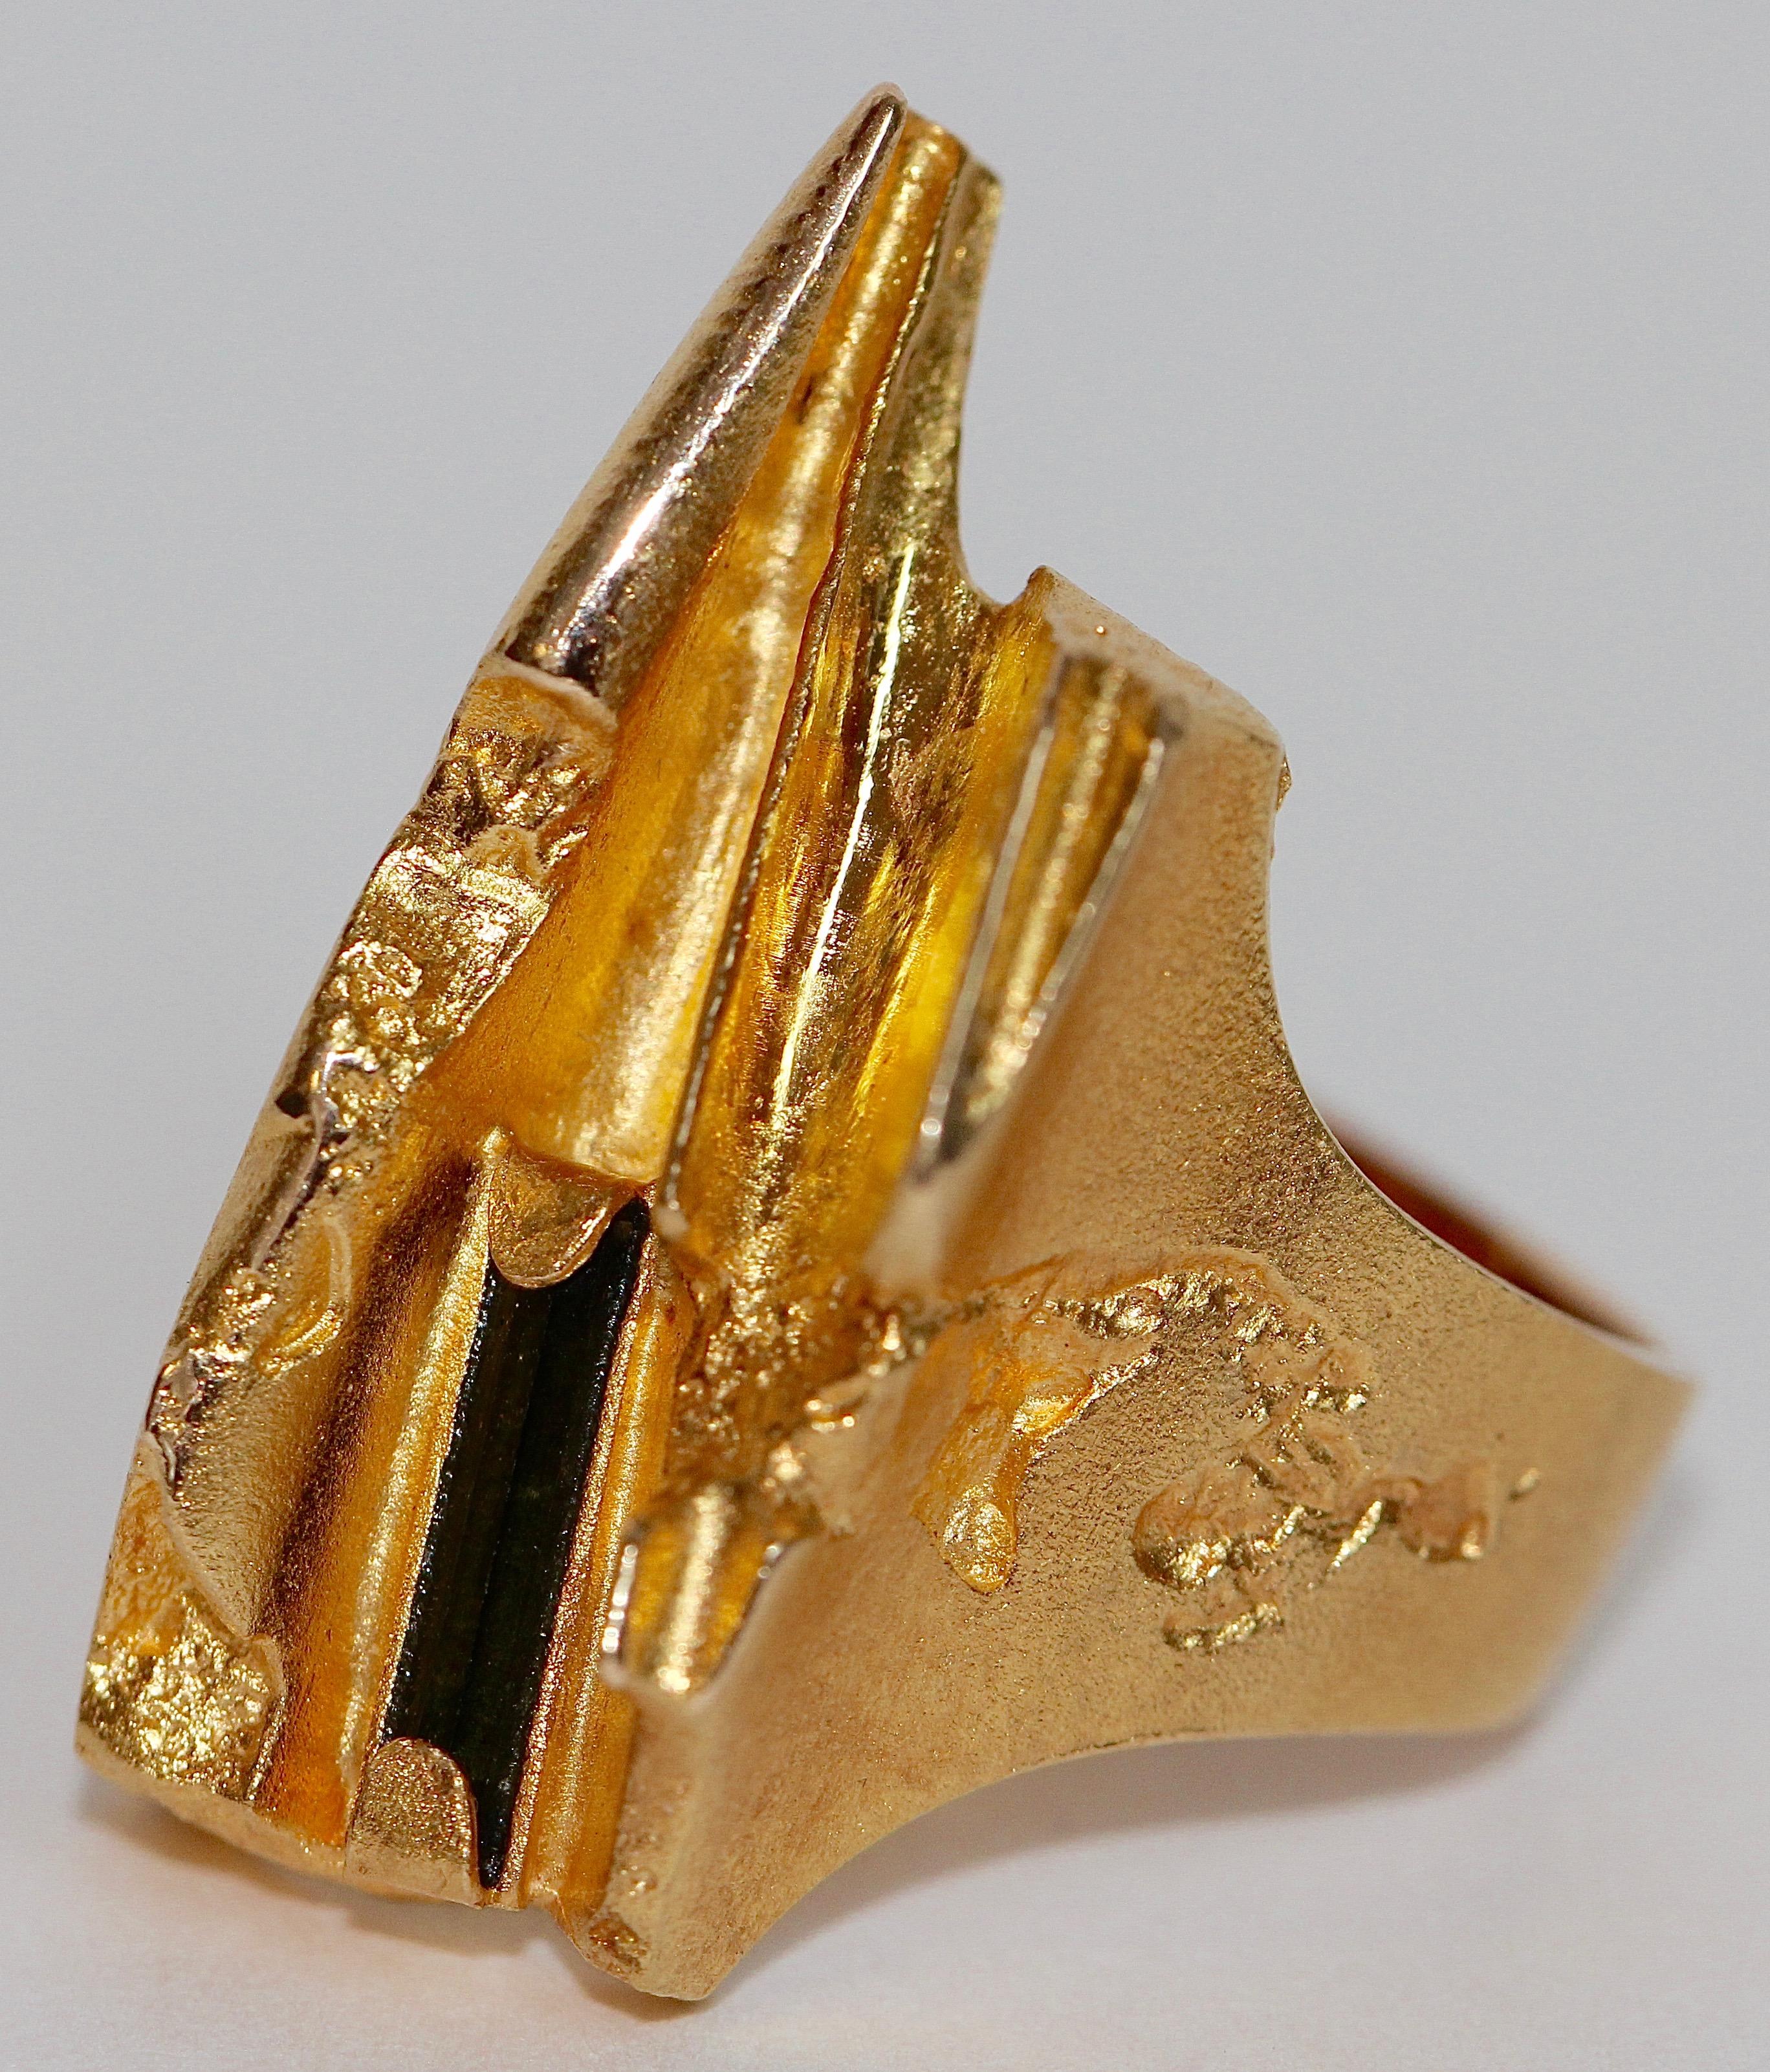 Beautiful ring from the designer brand Lapponia.
14k gold, set with tourmaline.